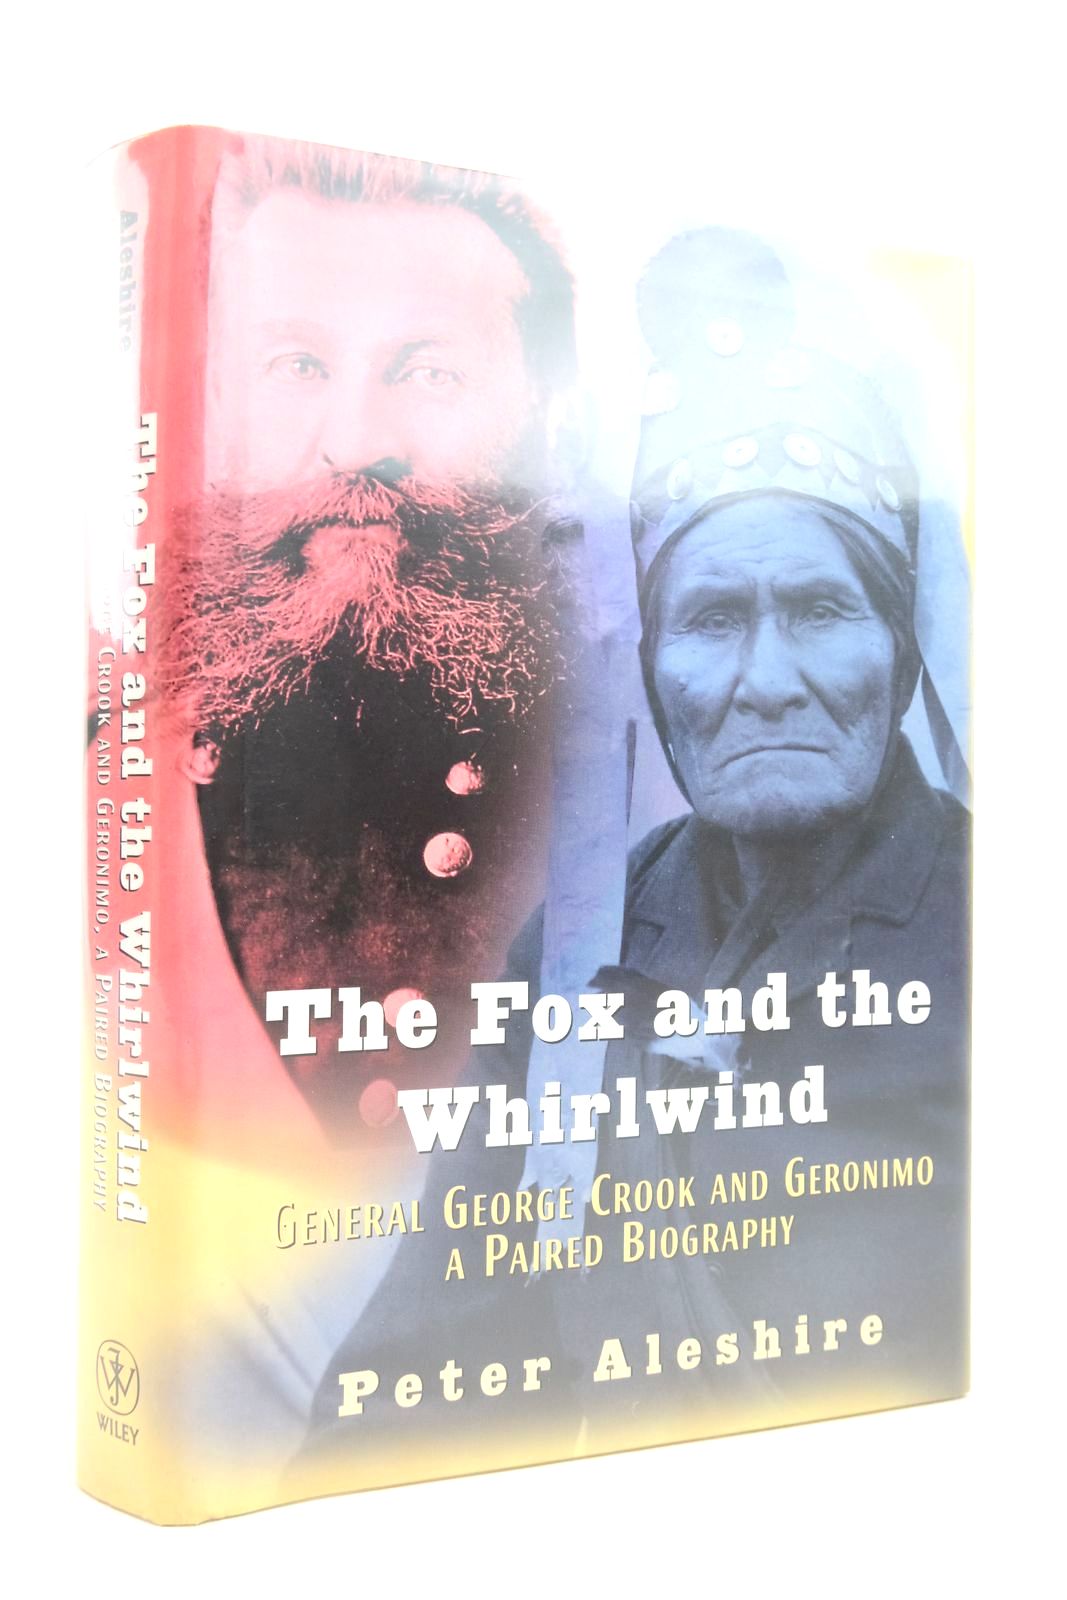 Photo of THE FOX AND THE WHIRLWIND: GENERAL GEORGE CROOK AND GERONIMO: A PAIRED BIOGRAPHY written by Aleshire, Peter published by John Wiley & Sons (STOCK CODE: 2136601)  for sale by Stella & Rose's Books